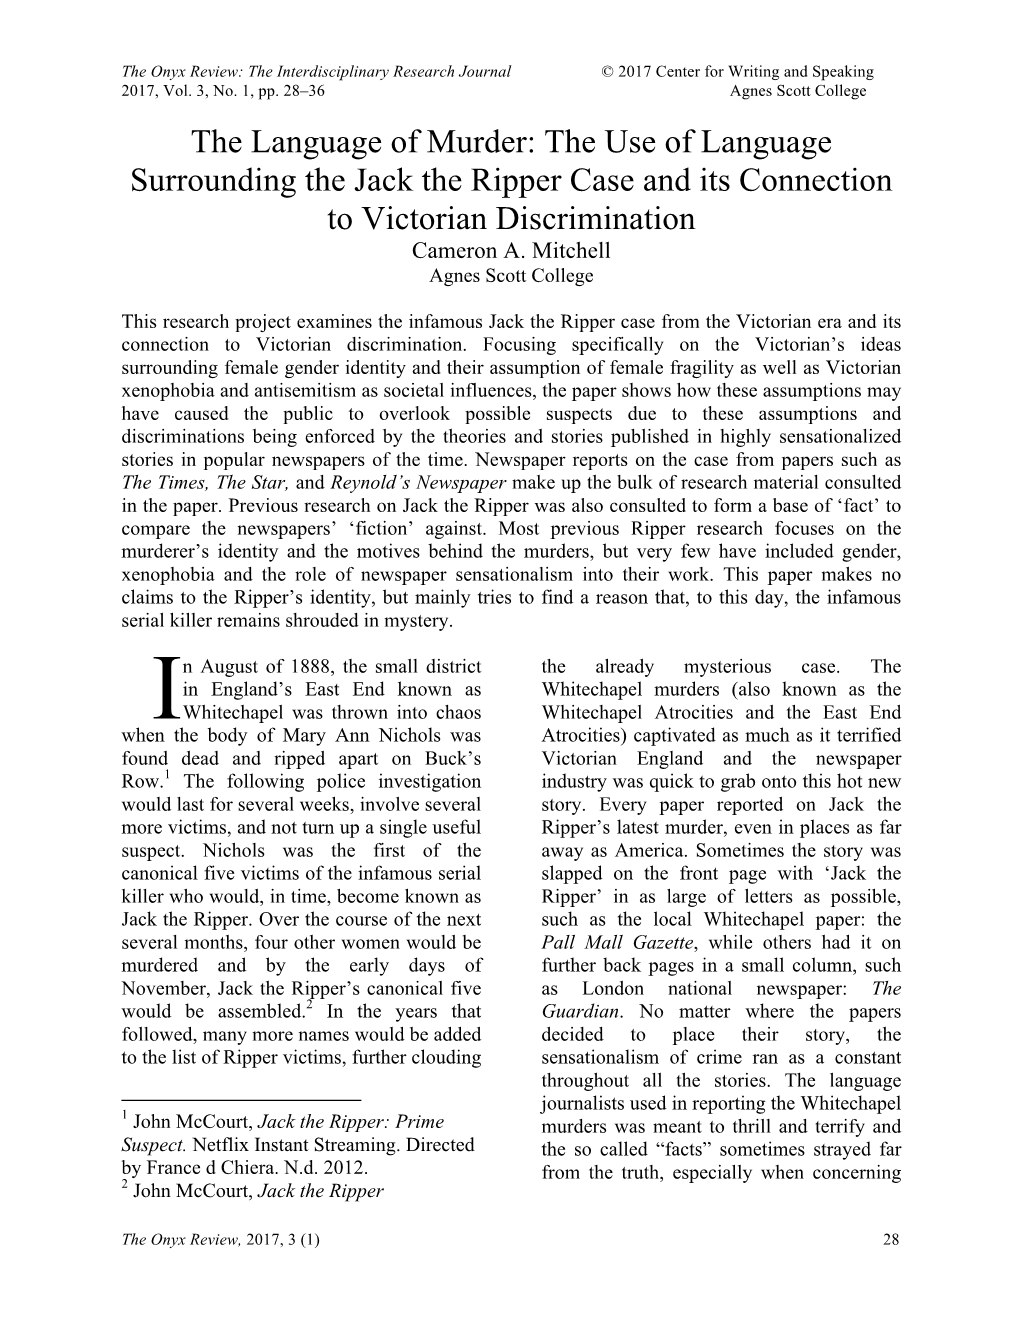 The Use of Language Surrounding the Jack the Ripper Case and Its Connection to Victorian Discrimination Cameron A